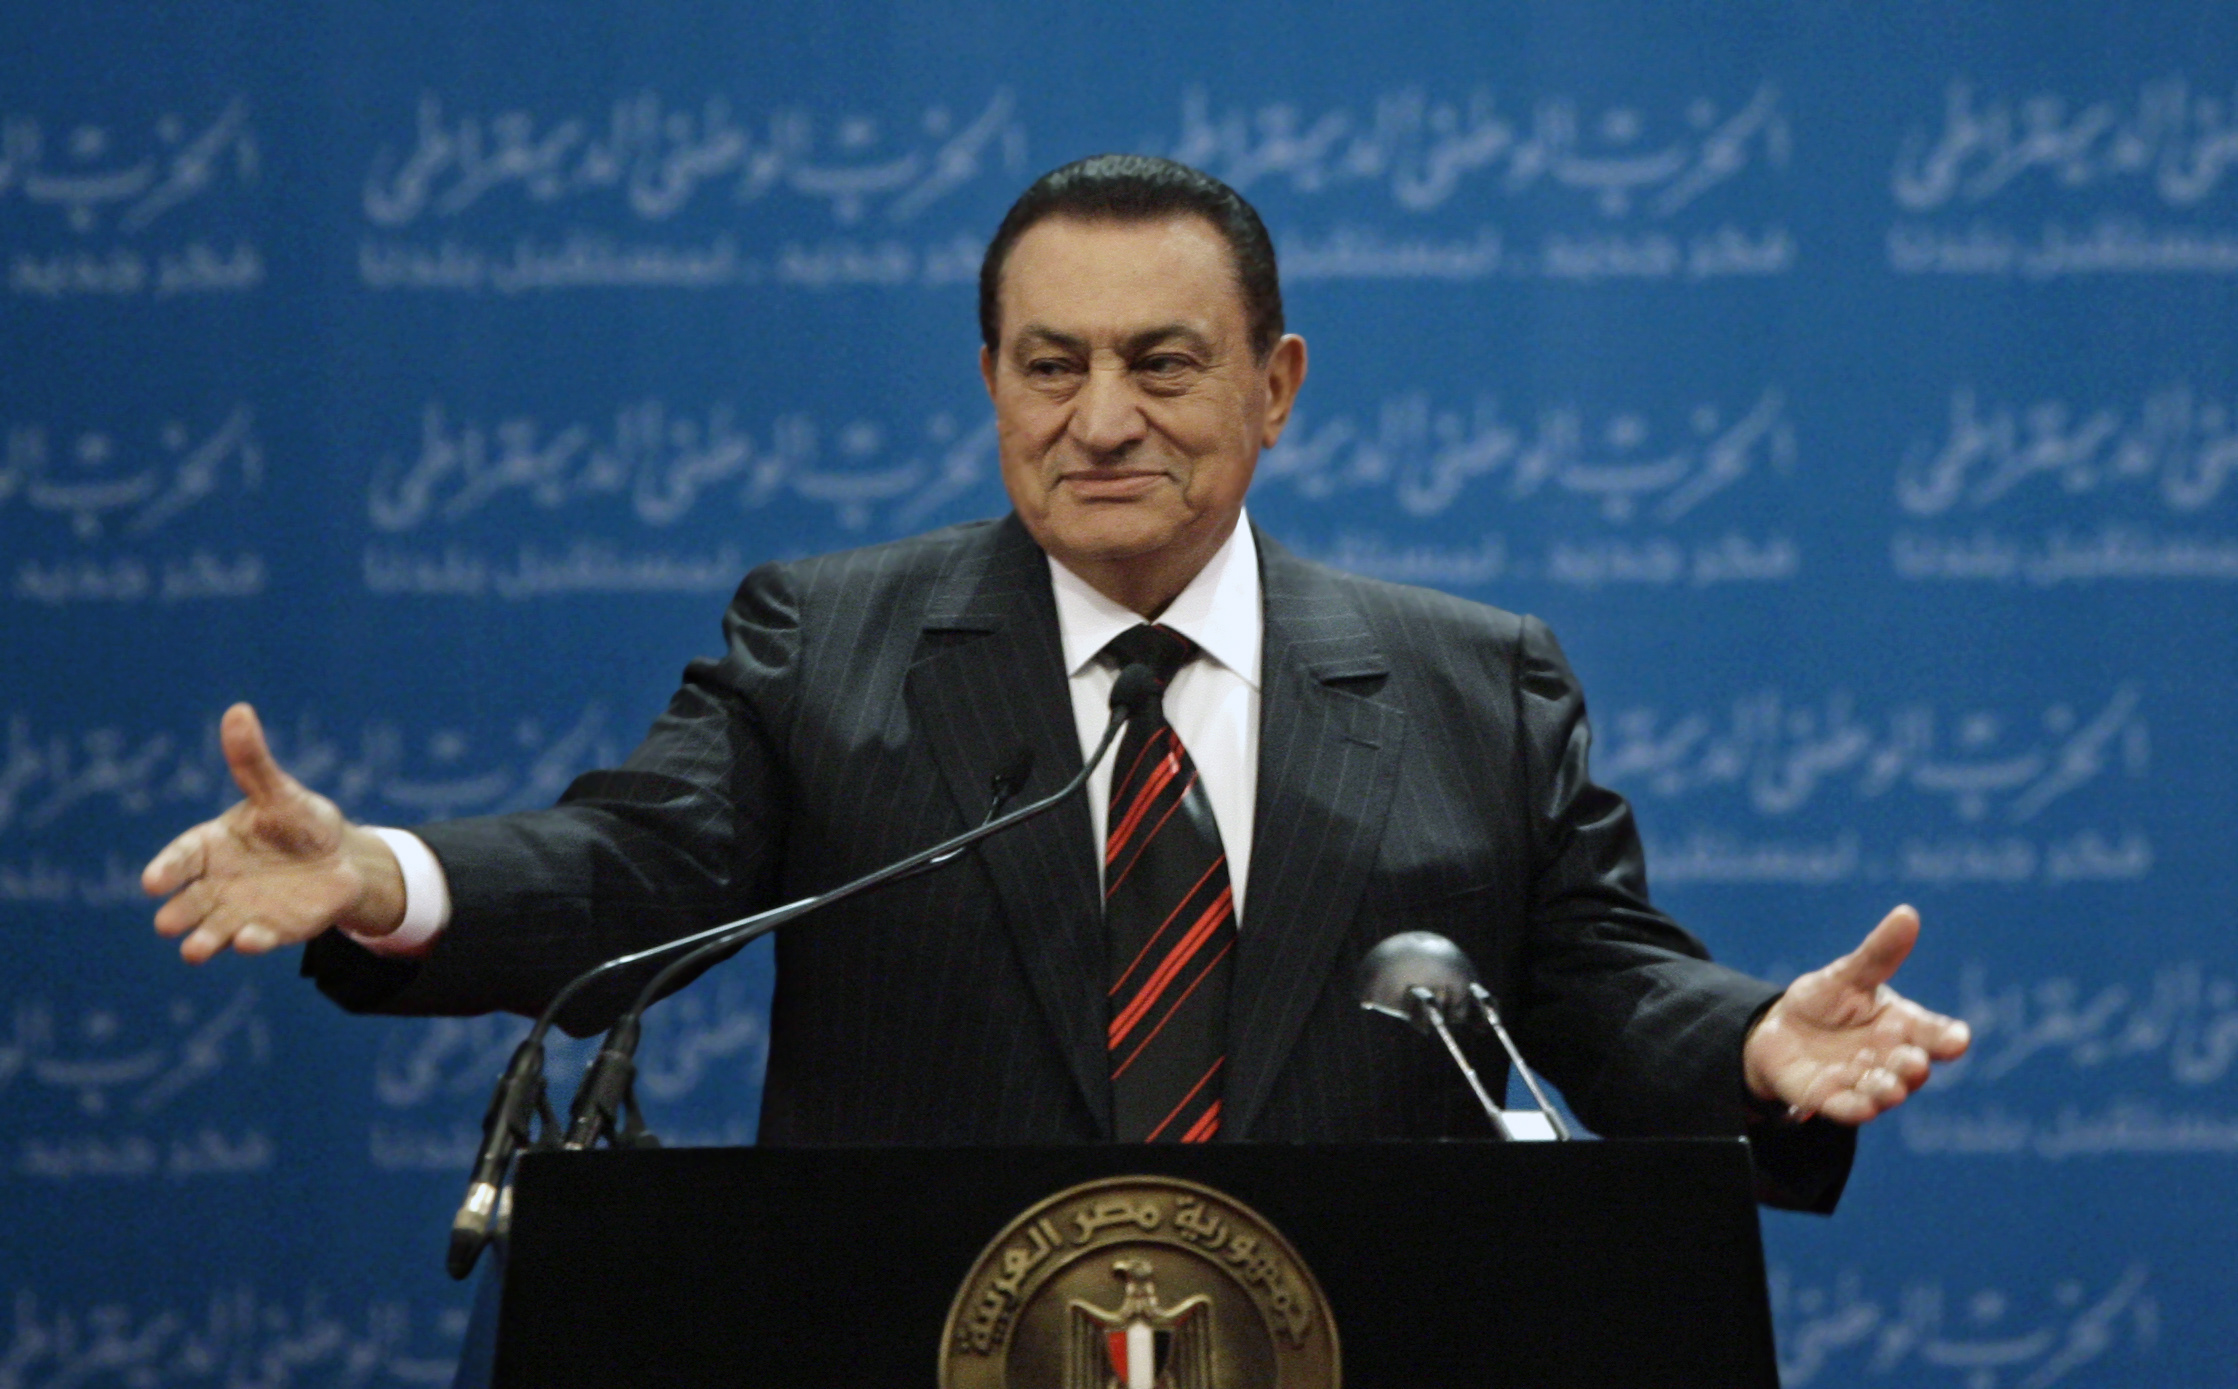 PHOTO: In this Nov. 1, 2008 file photo, Egyptian President Hosni Mubarak delivers a speech at the first day of the 5th annual convention of the ruling National Democratic Party in Cairo, Egypt.